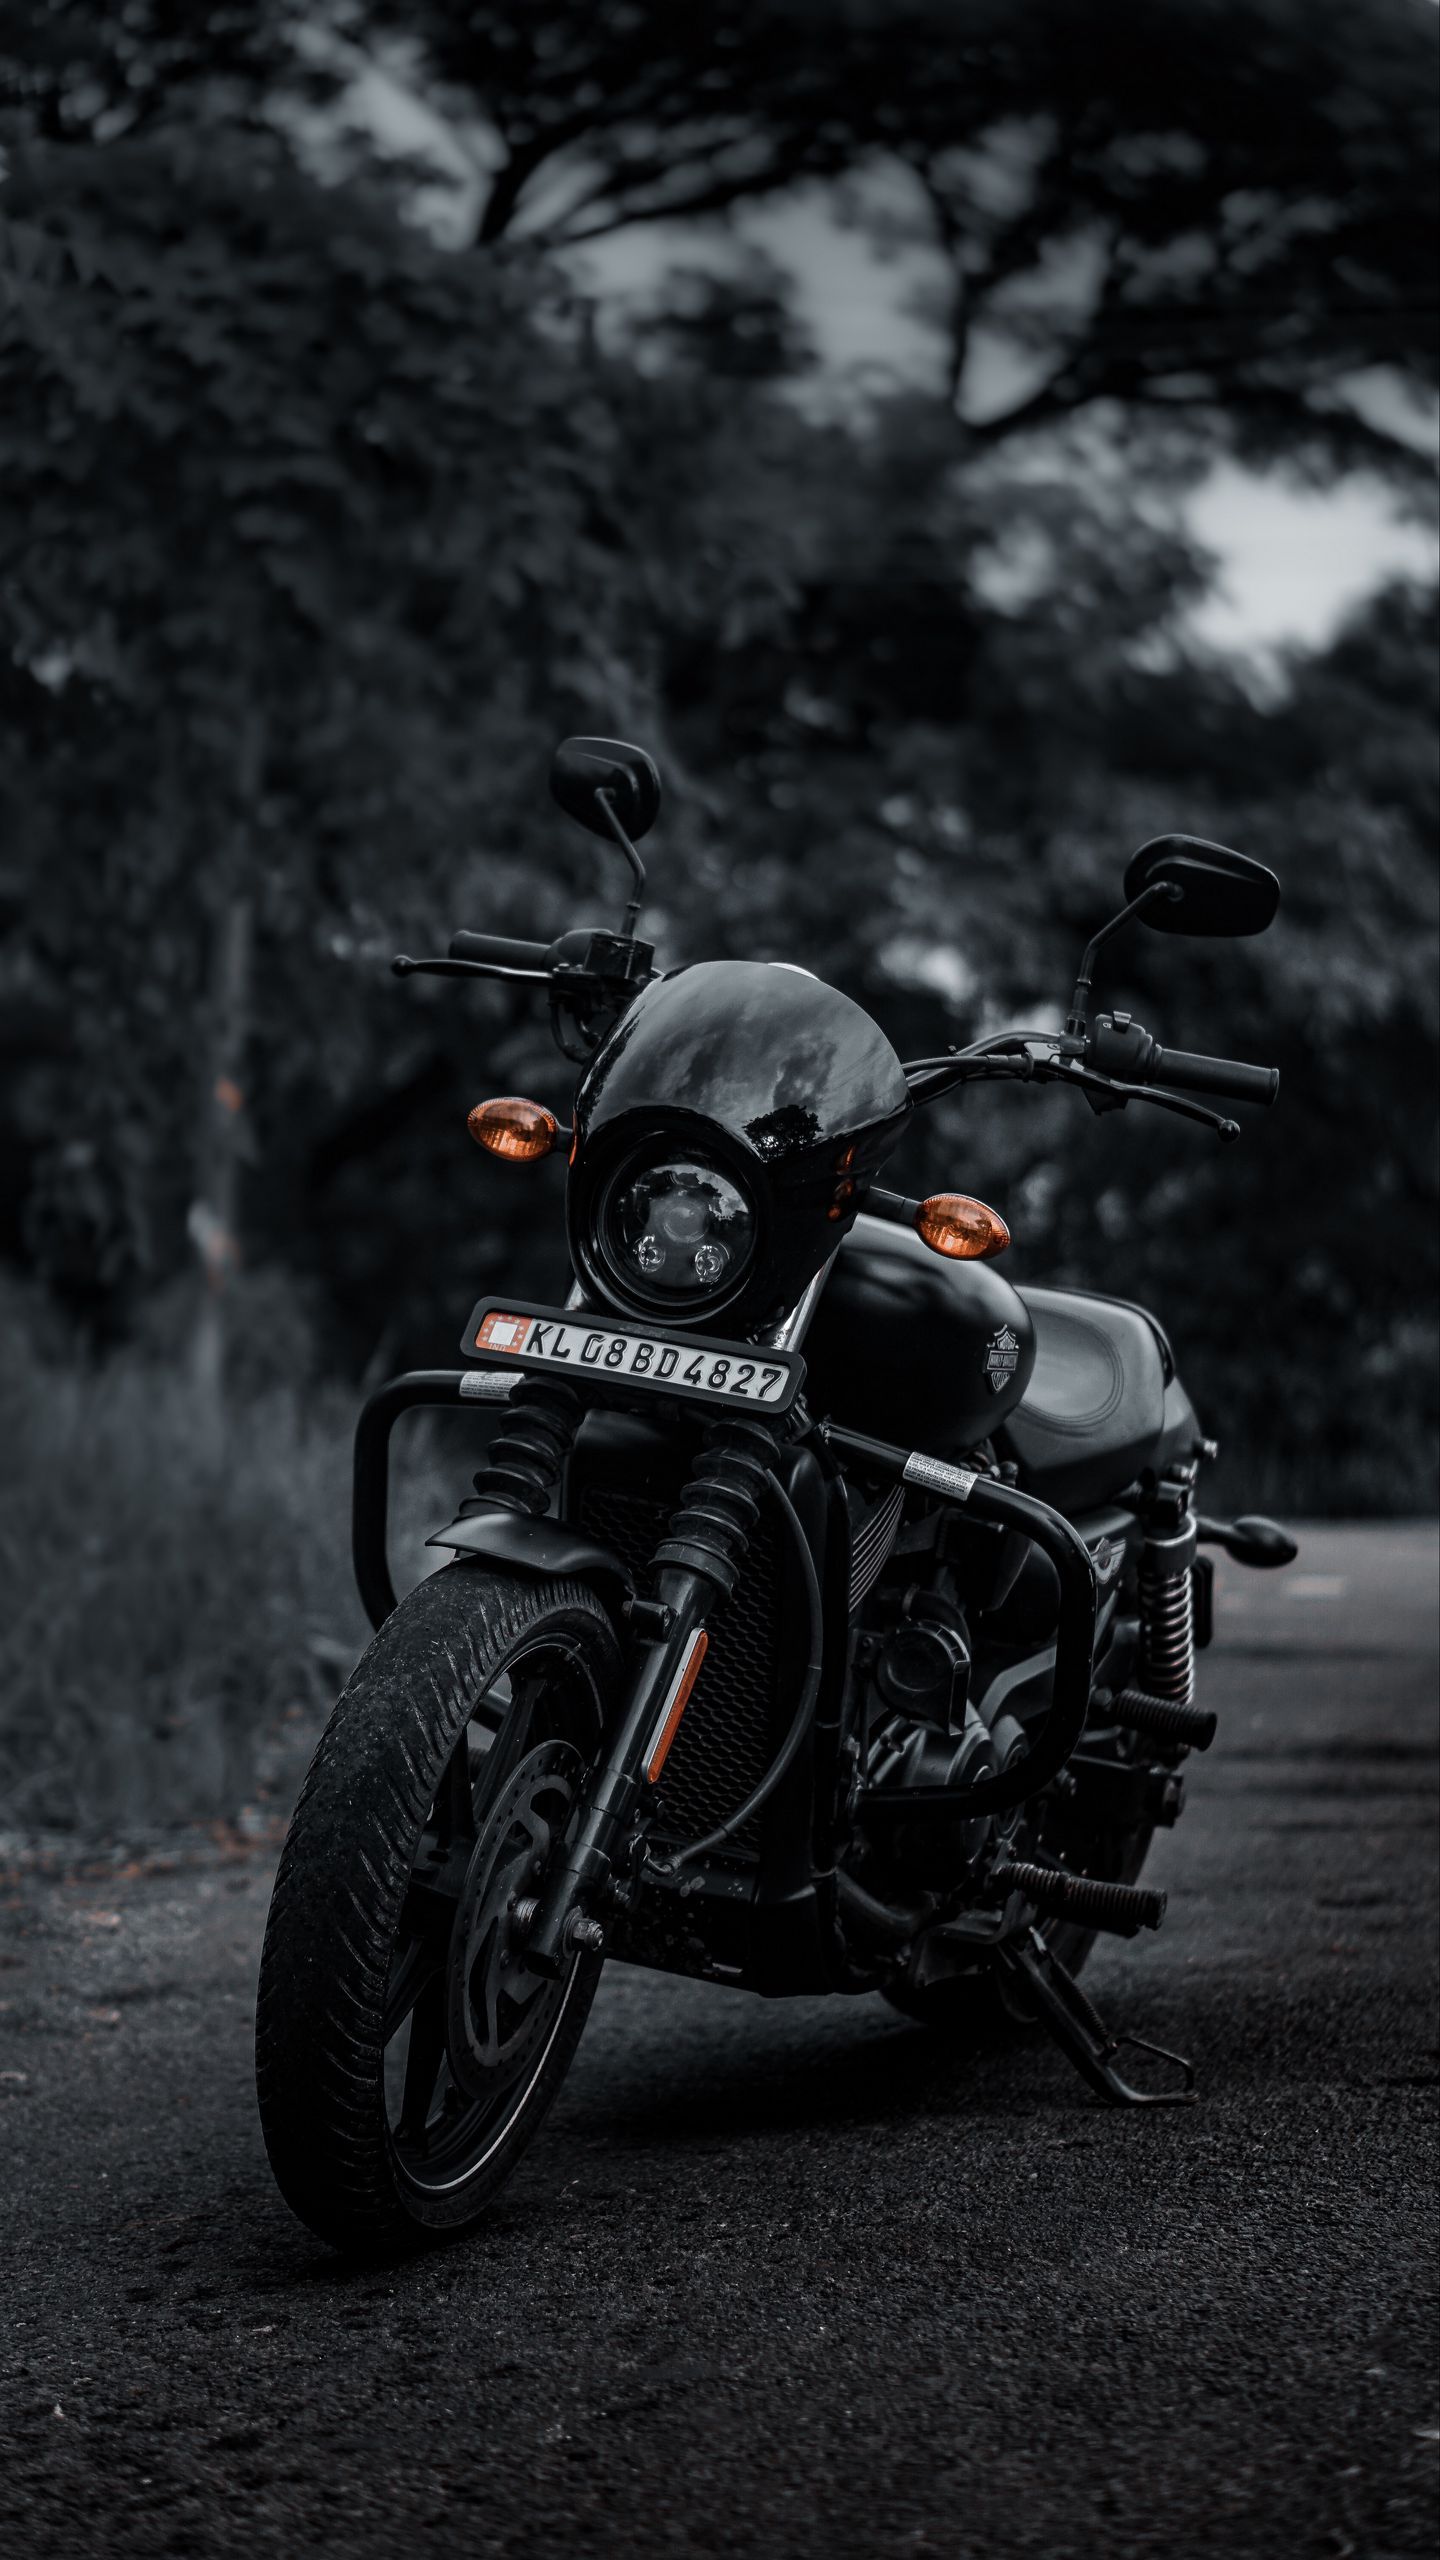 Download wallpaper 1440x2560 motorcycle, front view, bike, bw, headlight qhd samsung galaxy s s edge, note, lg g4 HD background